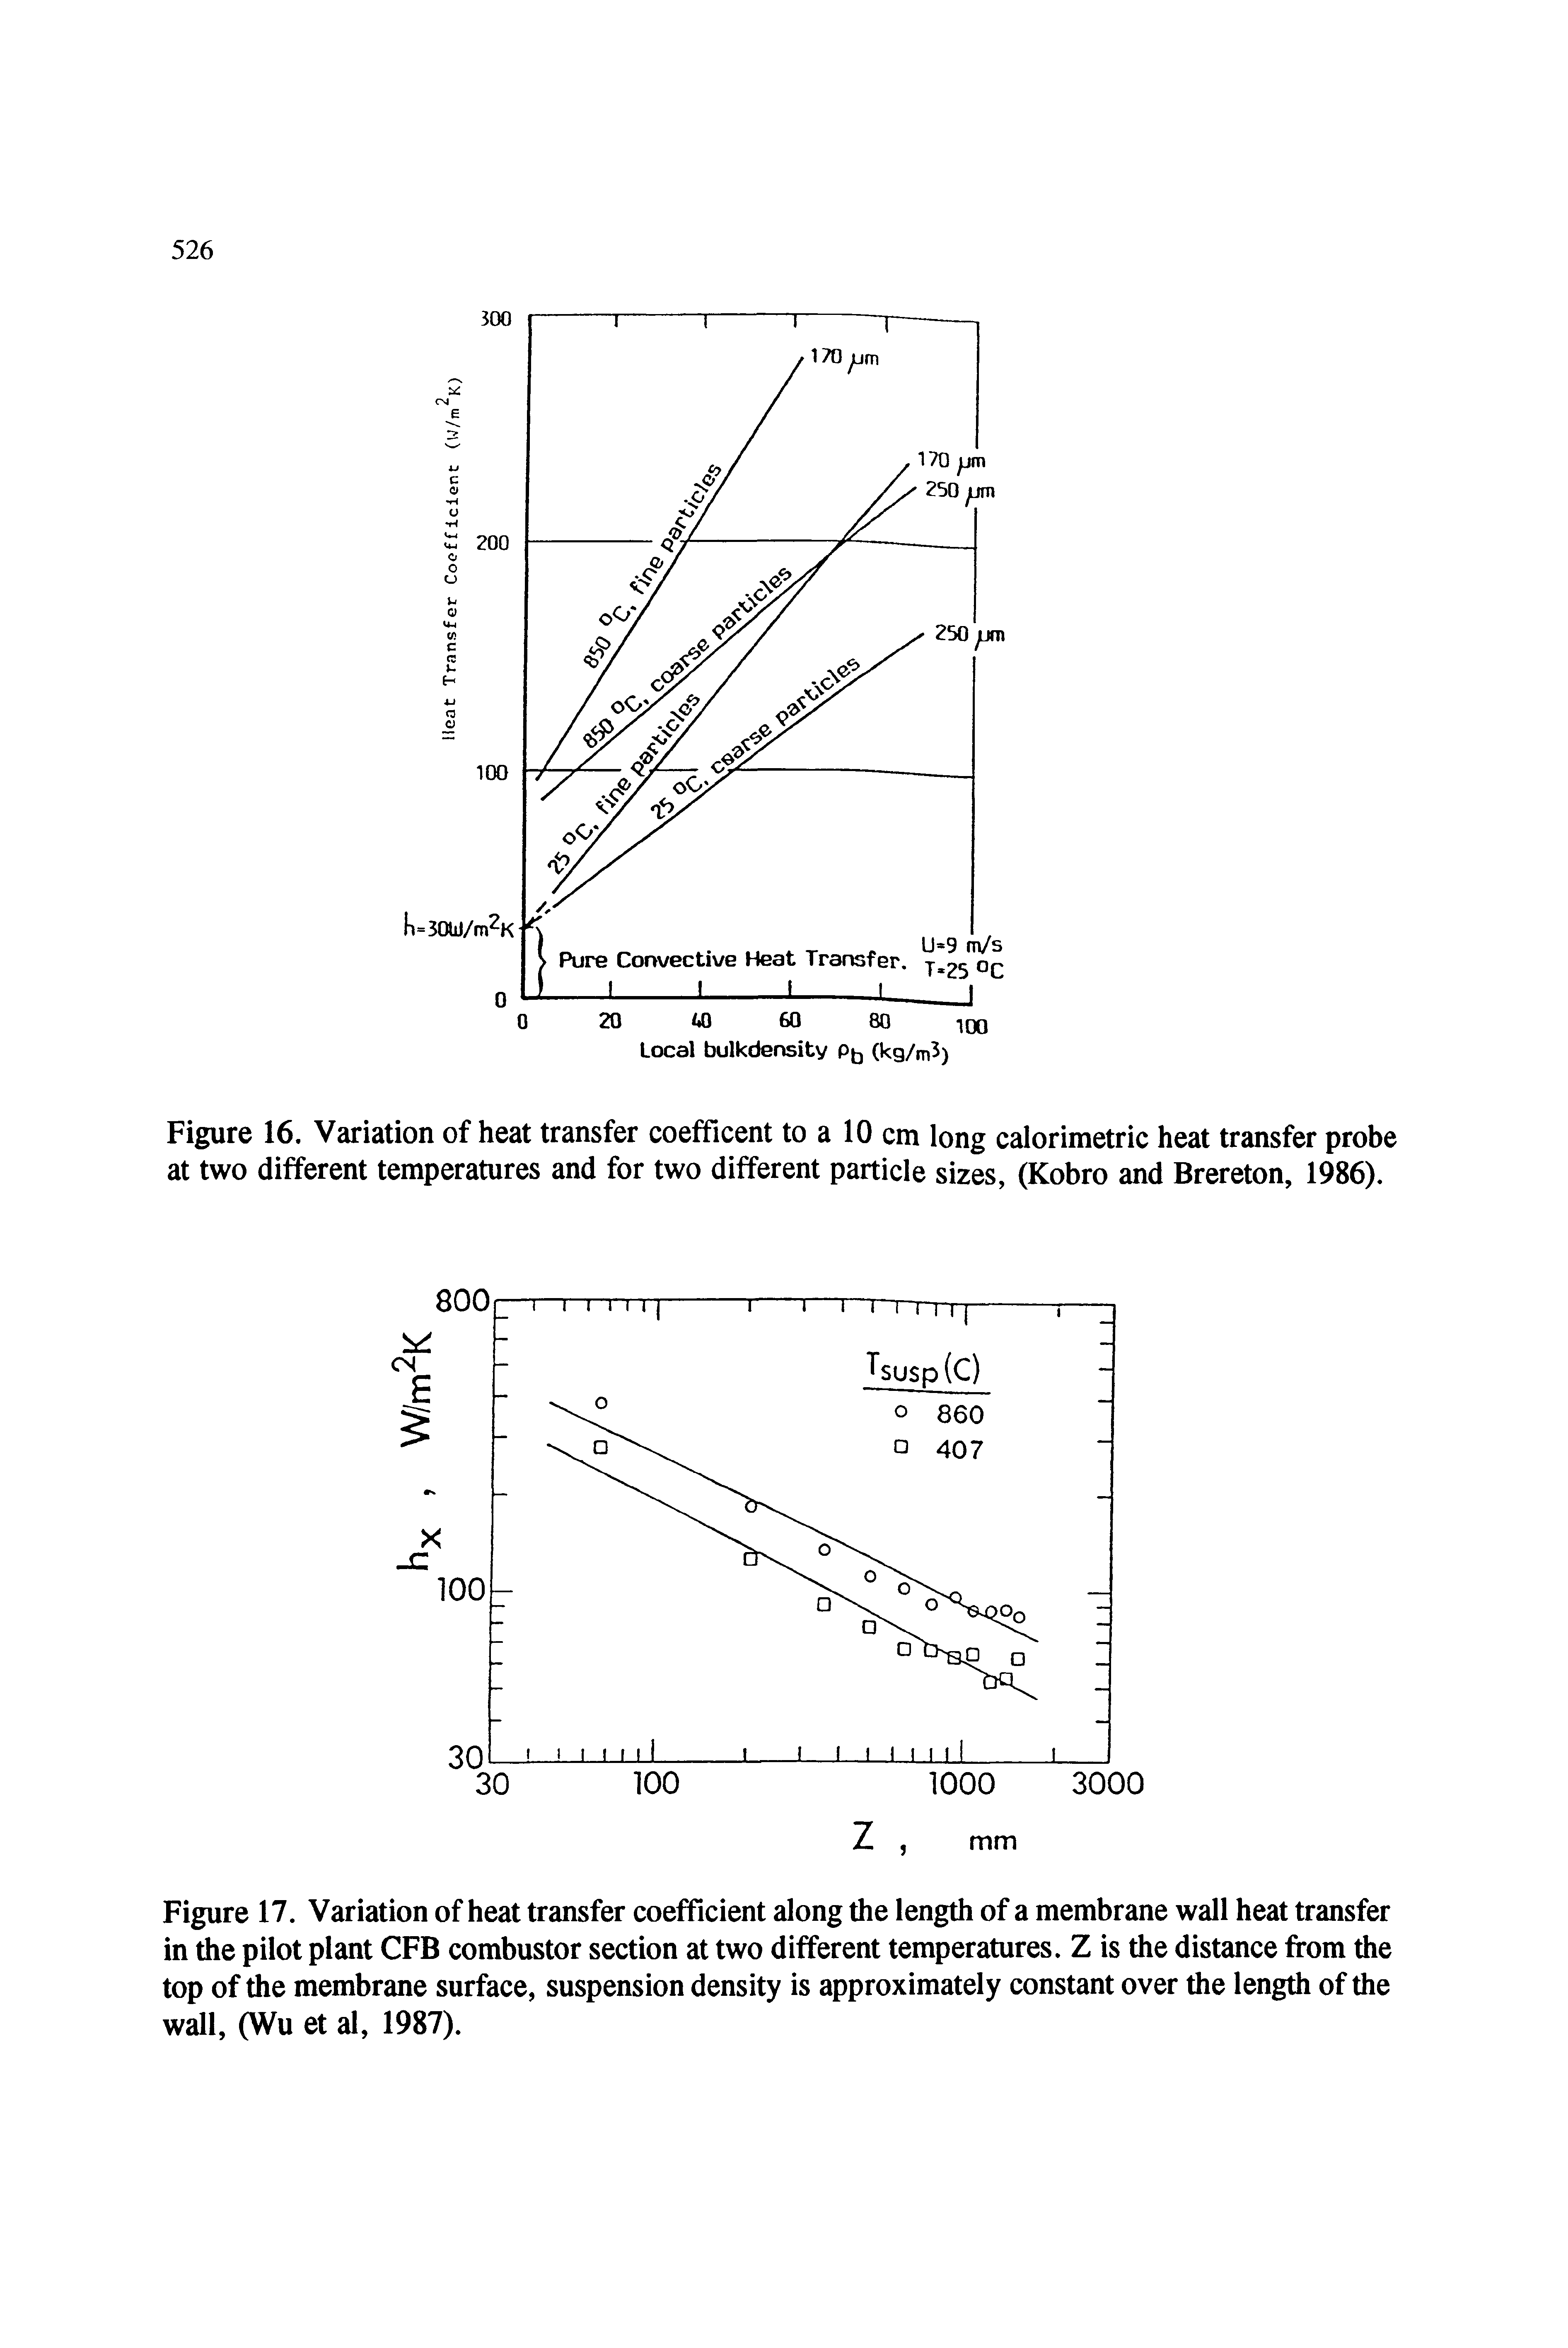 Figure 16. Variation of heat transfer coefficent to a 10 cm long calorimetric heat transfer probe at two different temperatures and for two different particle sizes, (Kobro and Brereton, 1986).